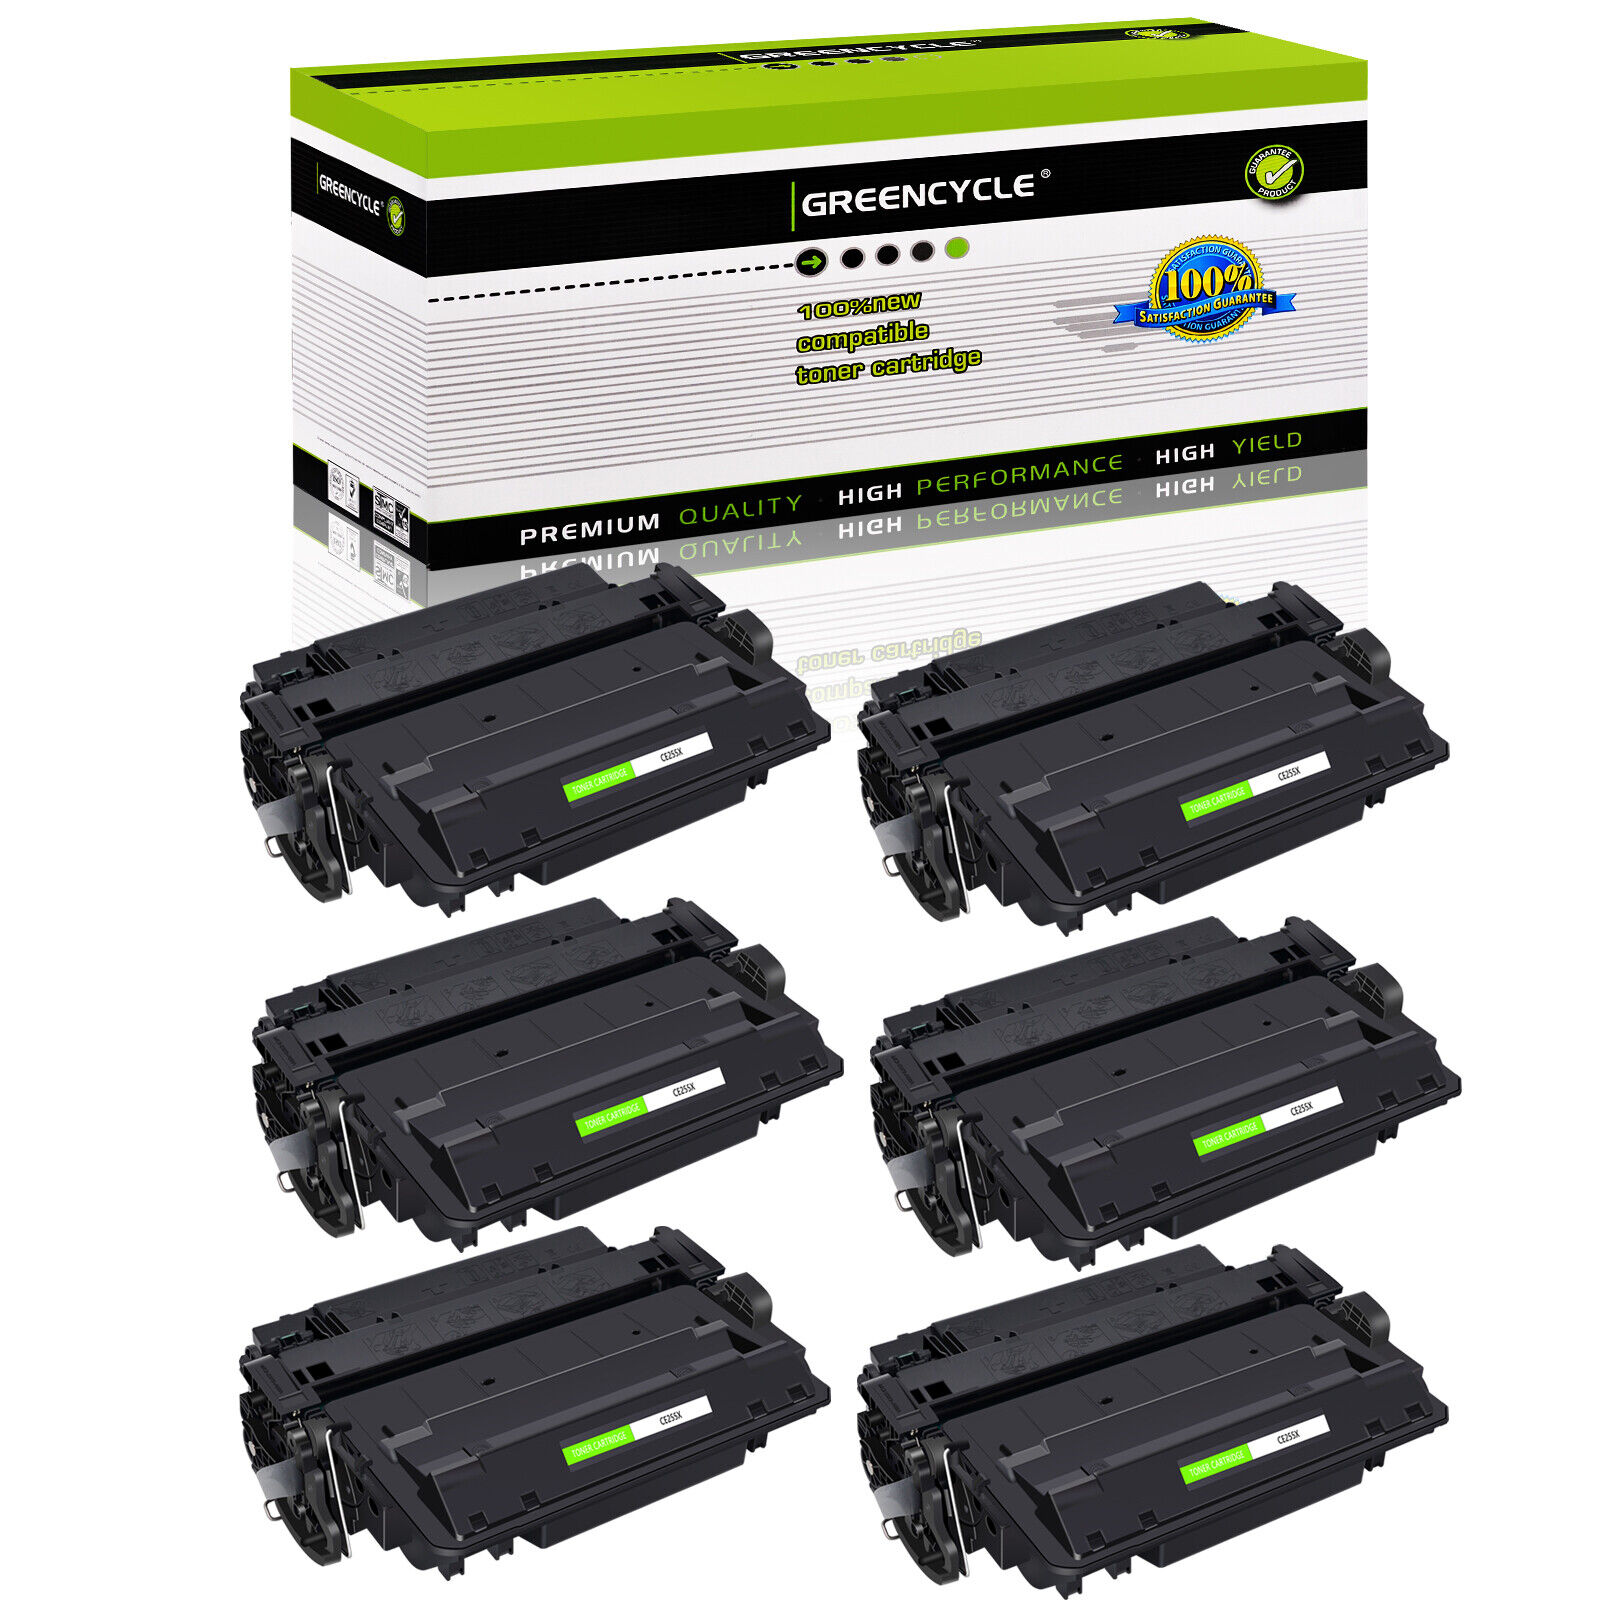 Greencycle - 6 PACK CE255X 55X High Yield Toner Cartridge for HP LaserJet